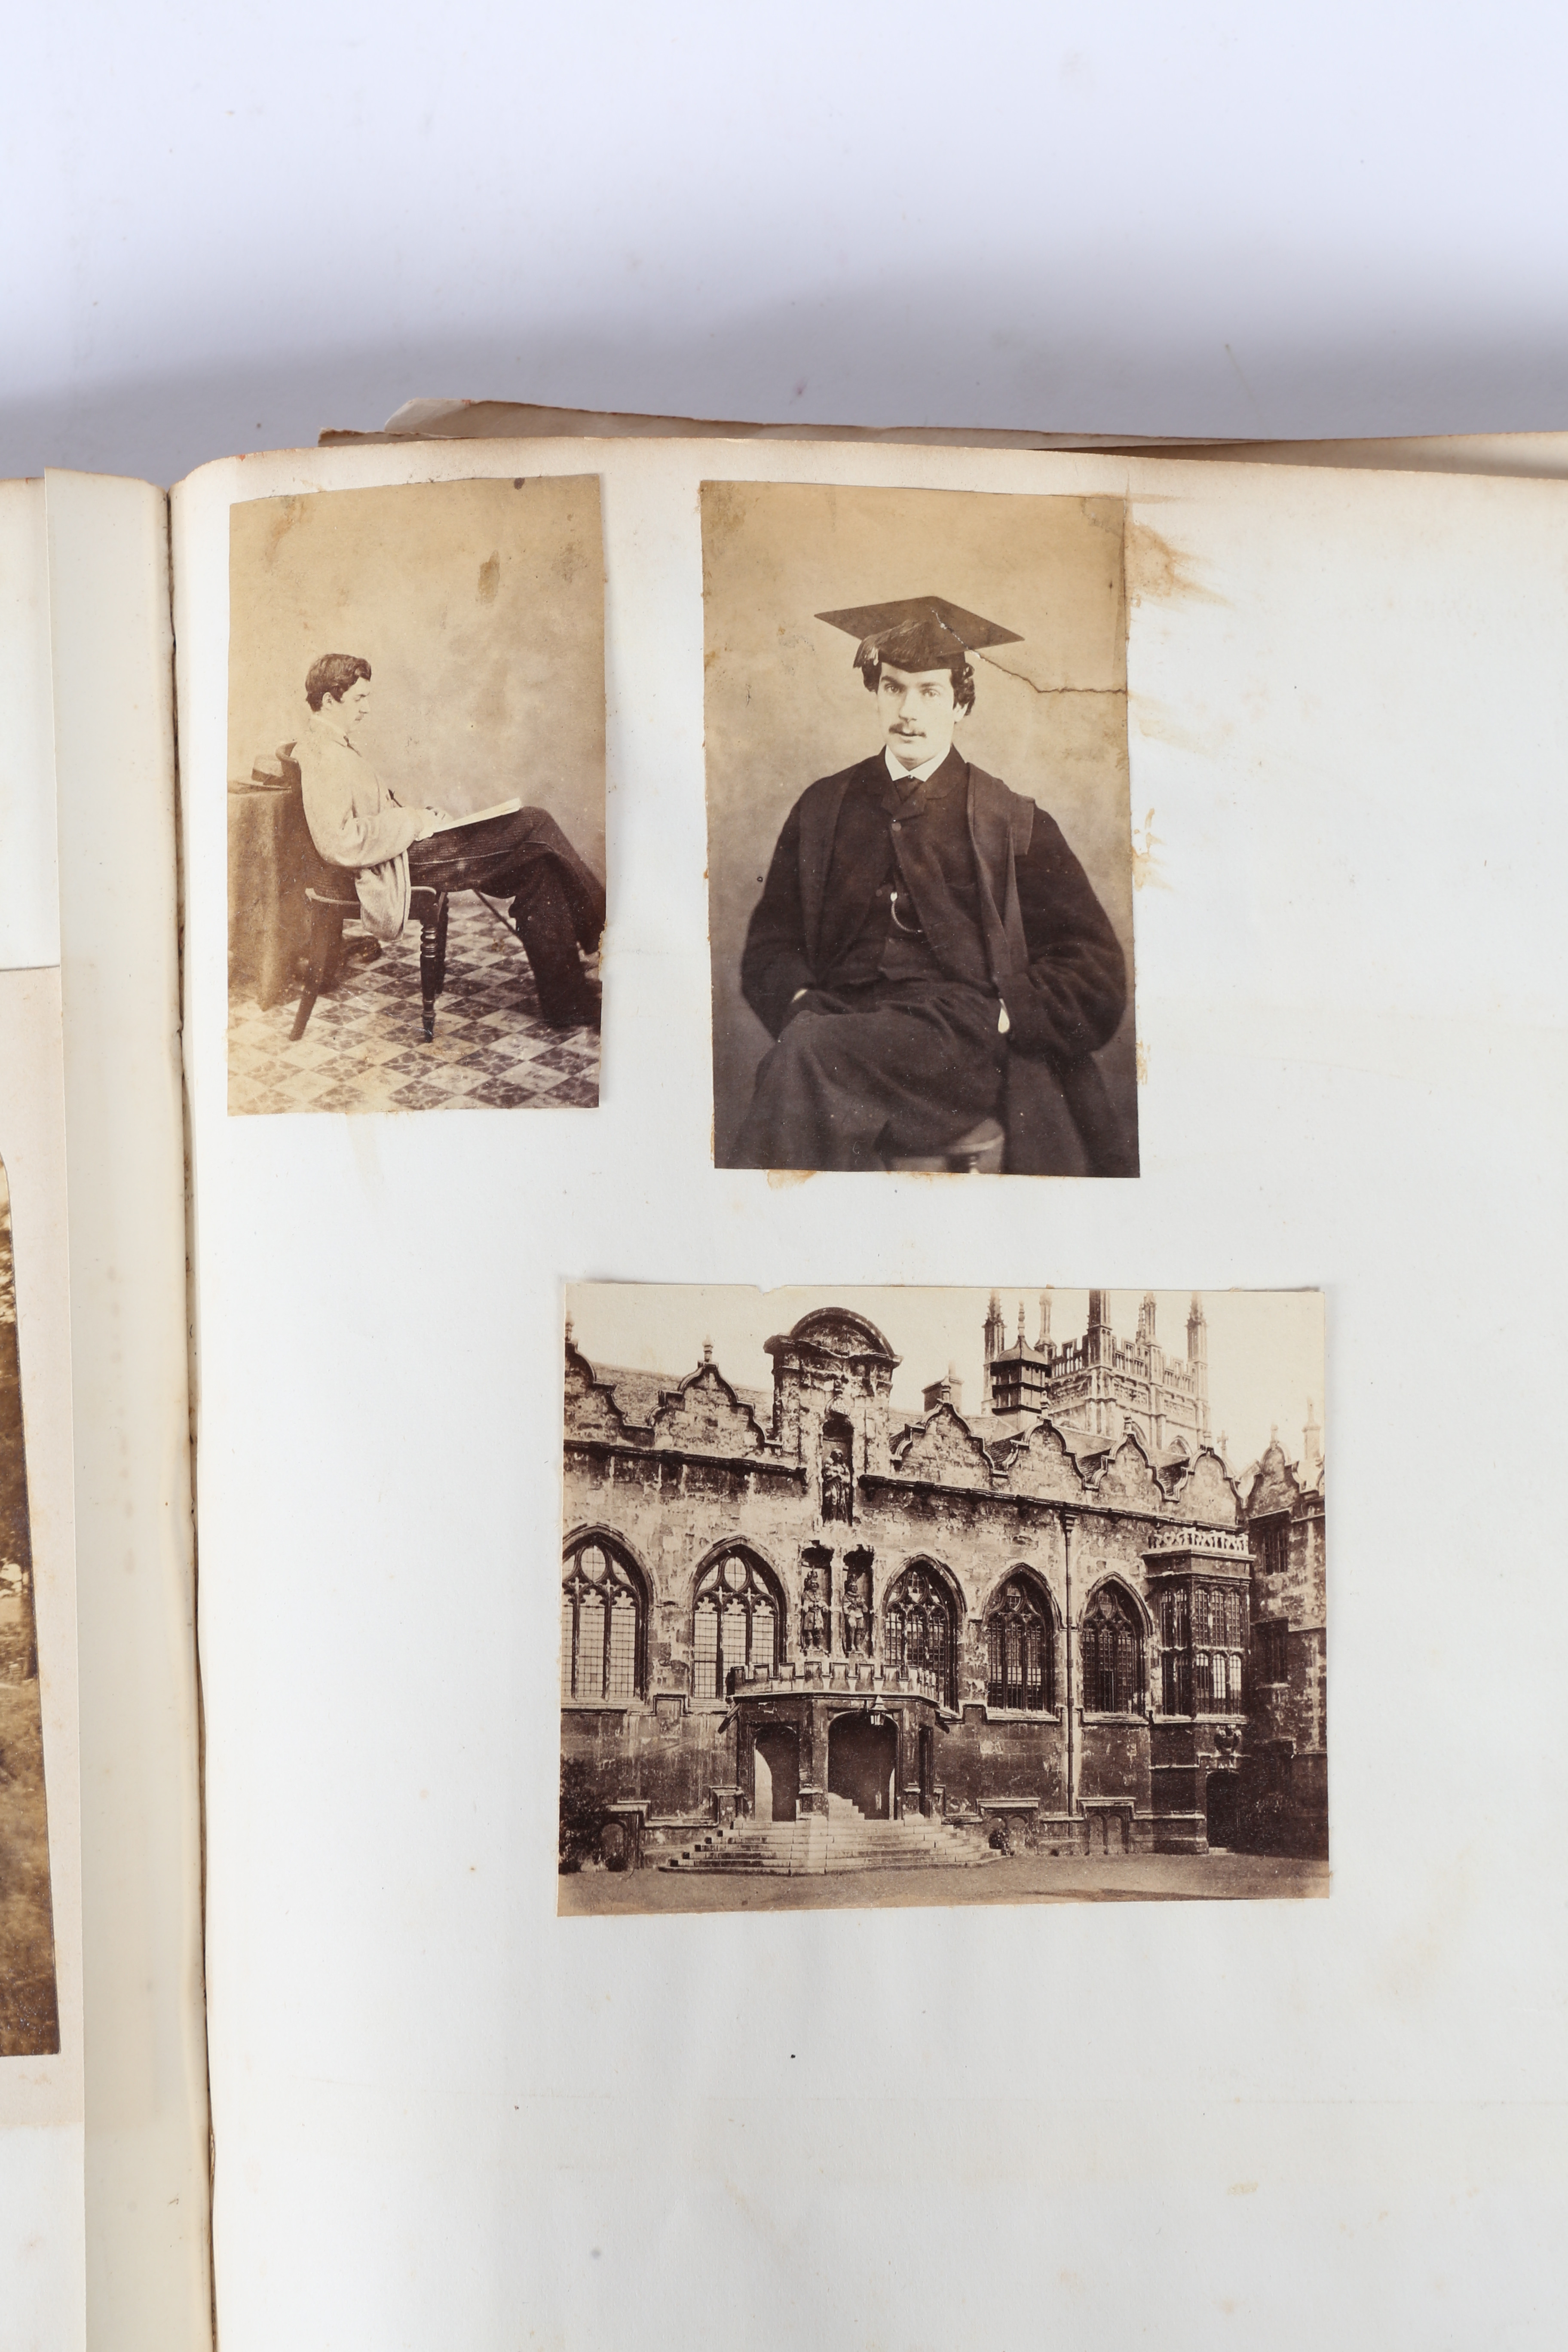 VICTORIAN PHOTOGRAPH ALBUM BELONGING TO GENERAL SIR HARRY JONES GCB DCL, AND HIS WIFE LADY CHARLOTTE - Image 34 of 60